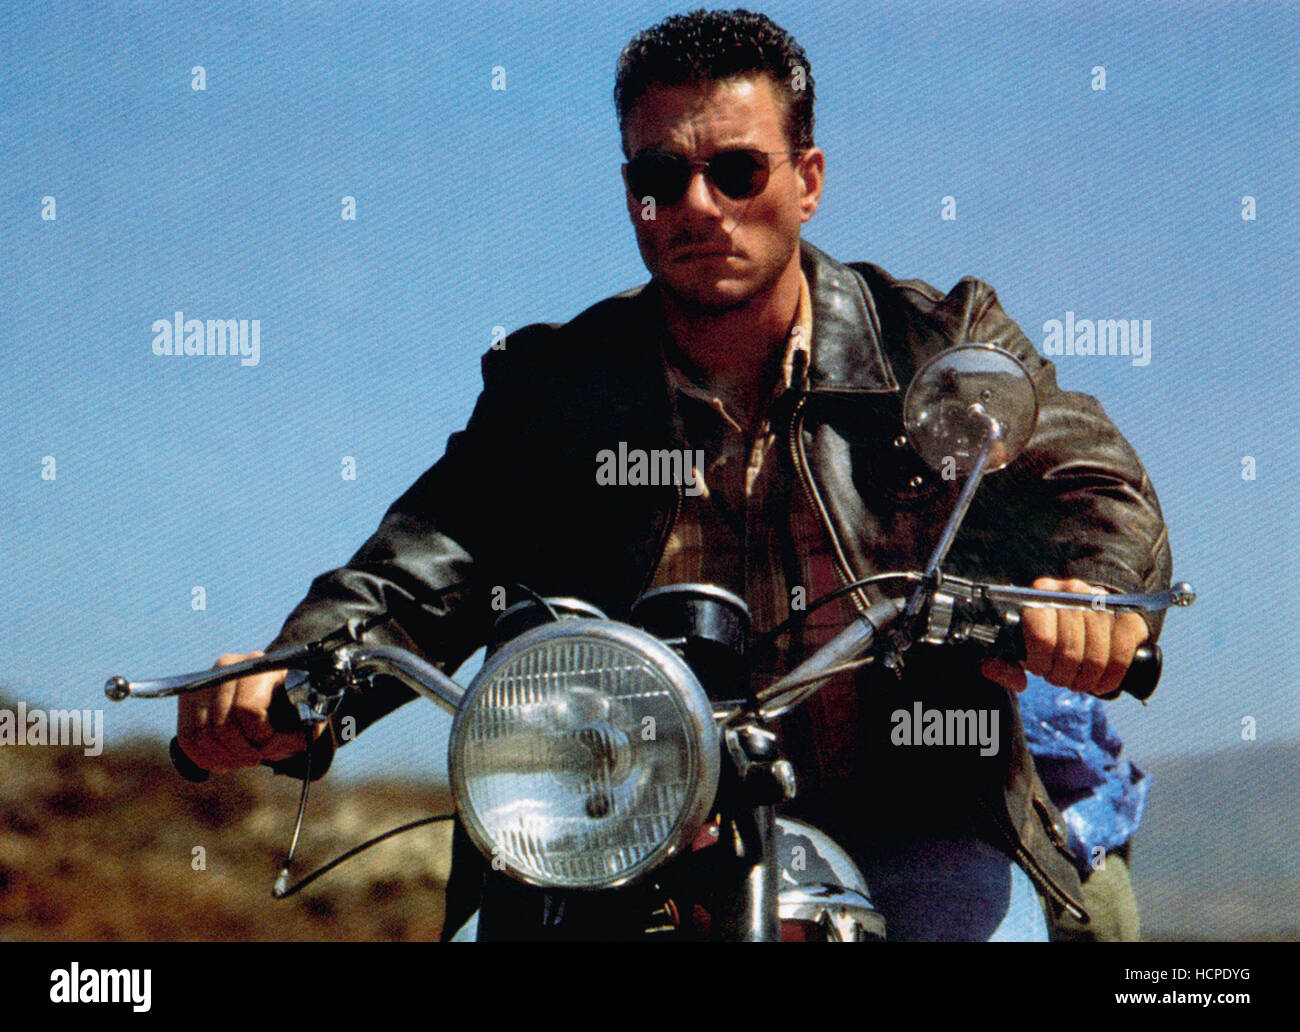 NOWHERE TO RUN, Jean-Claude Van Damme, 1993. ©Columbia Pictures/Courtesy  Everett Collection Stock Photo - Alamy